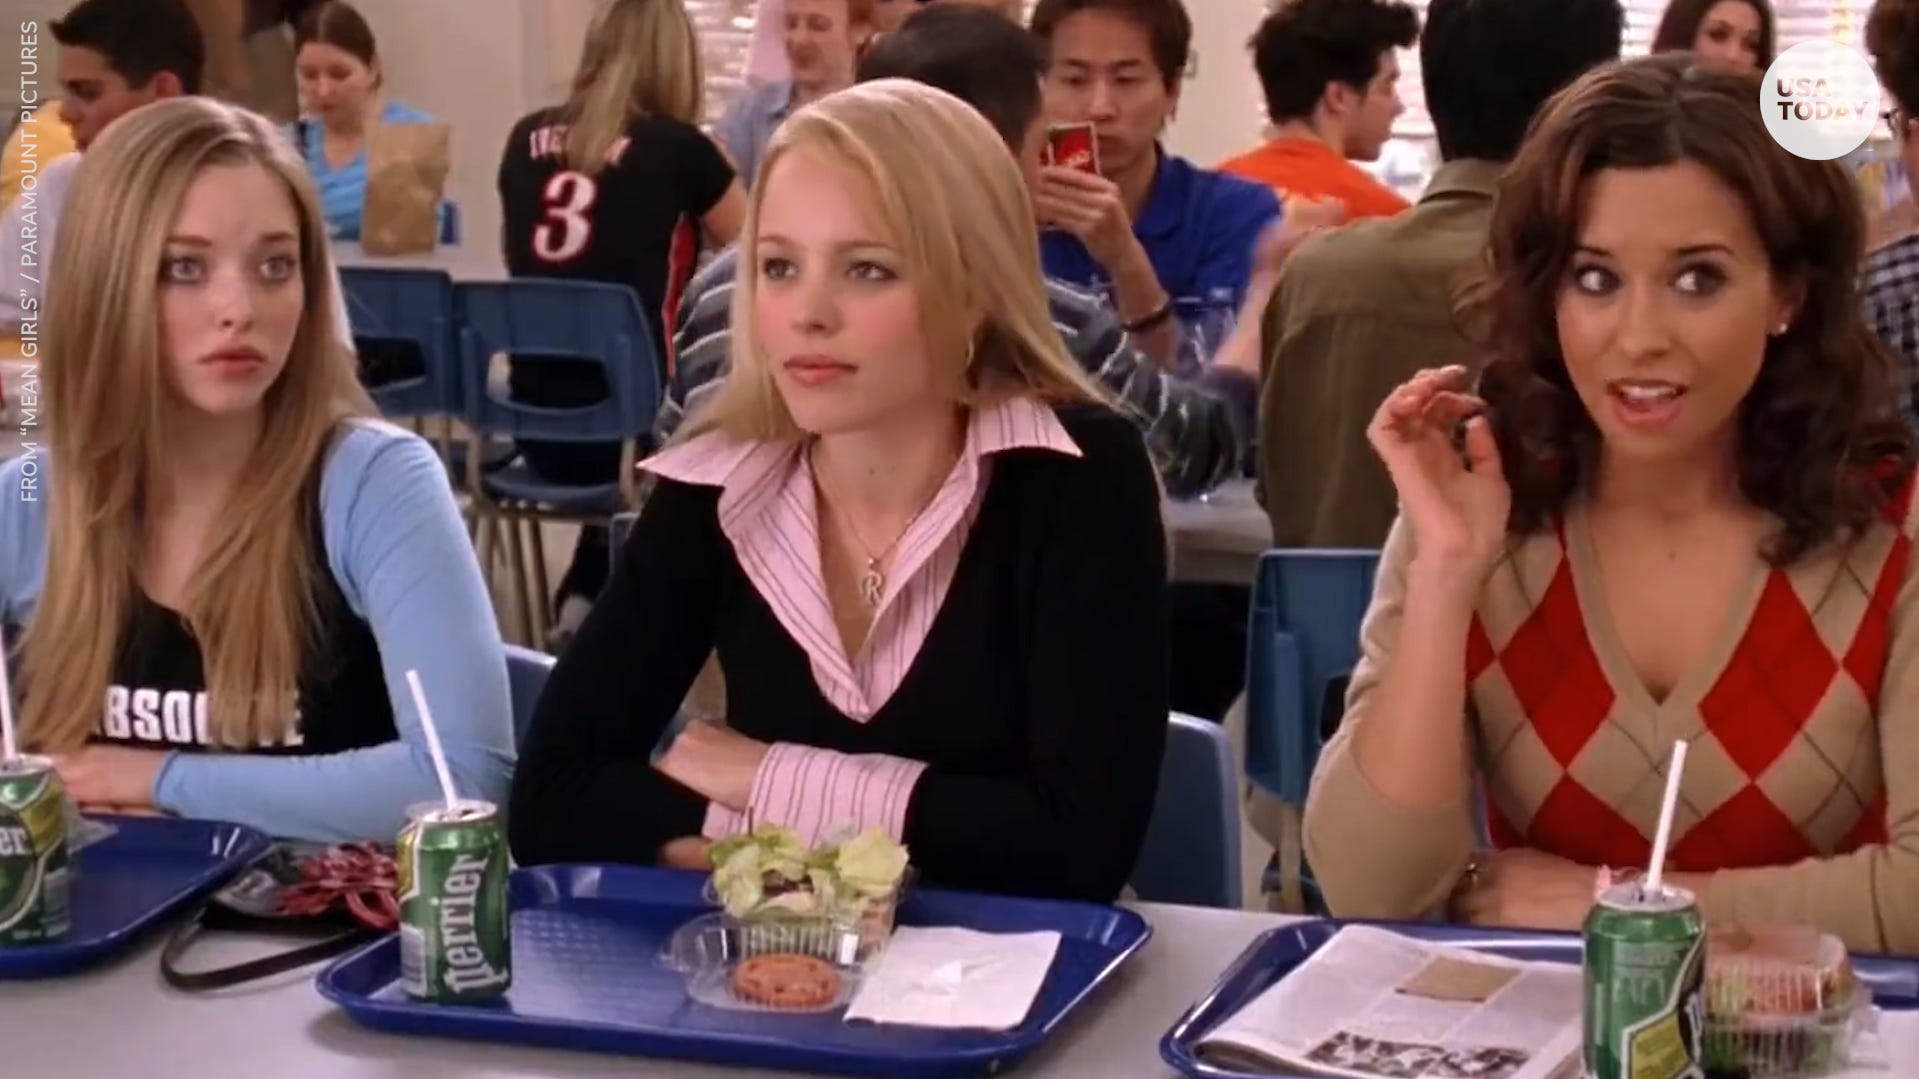 4 iconic 'Mean Girls' moments that we won't